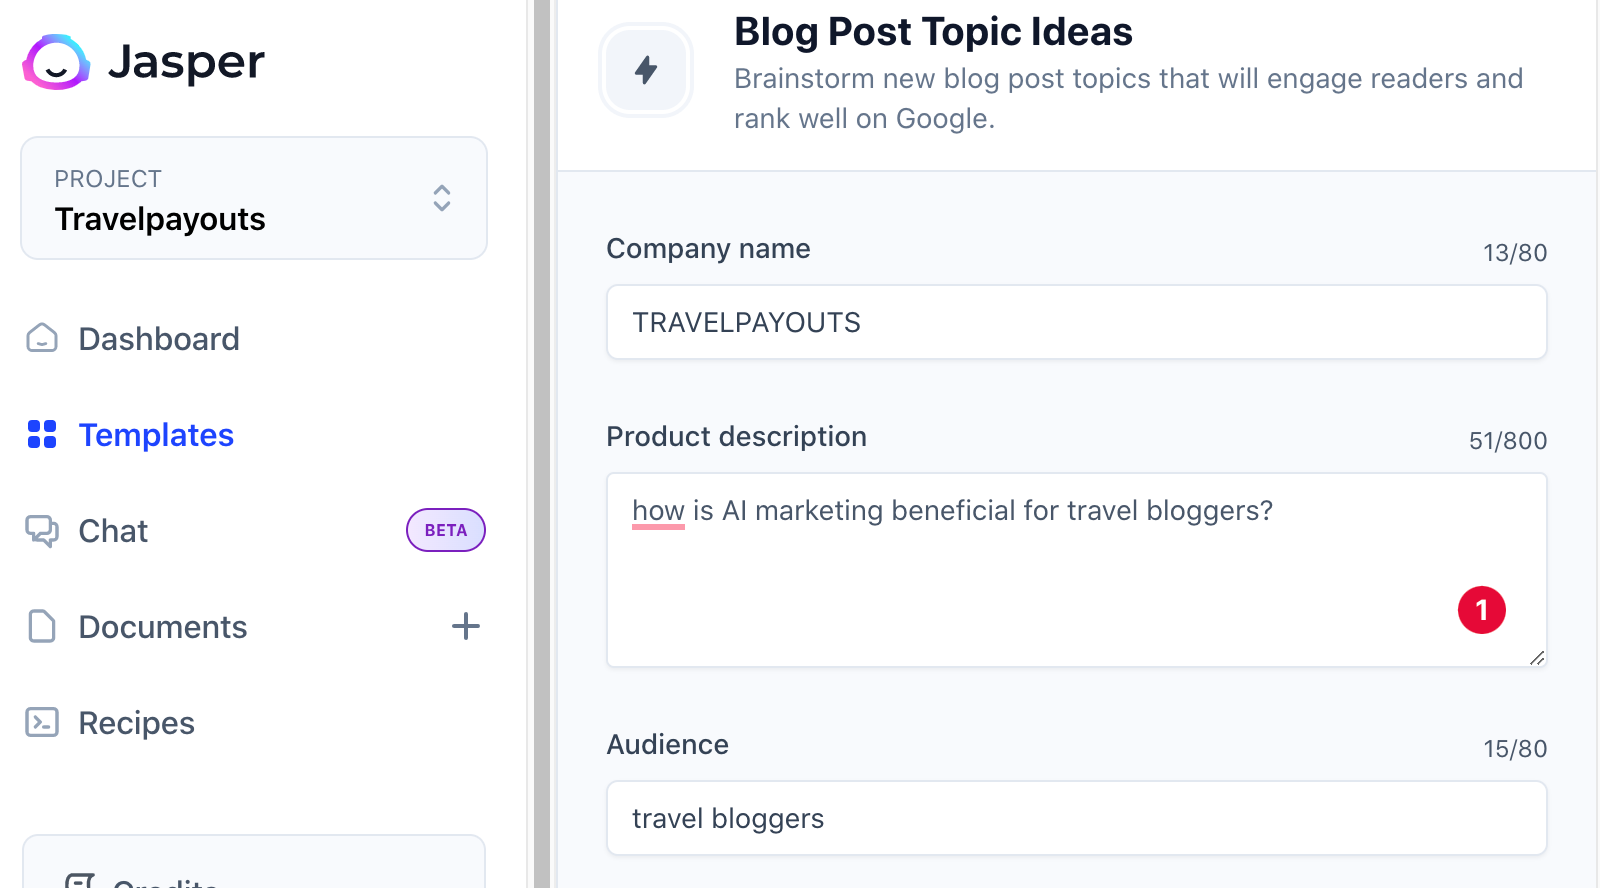 The image displays a template on Jasper.ai used to create blog post topic ideas. With only a few inputs, including a product description asking, “how is AI marketing beneficial for travel bloggers?”